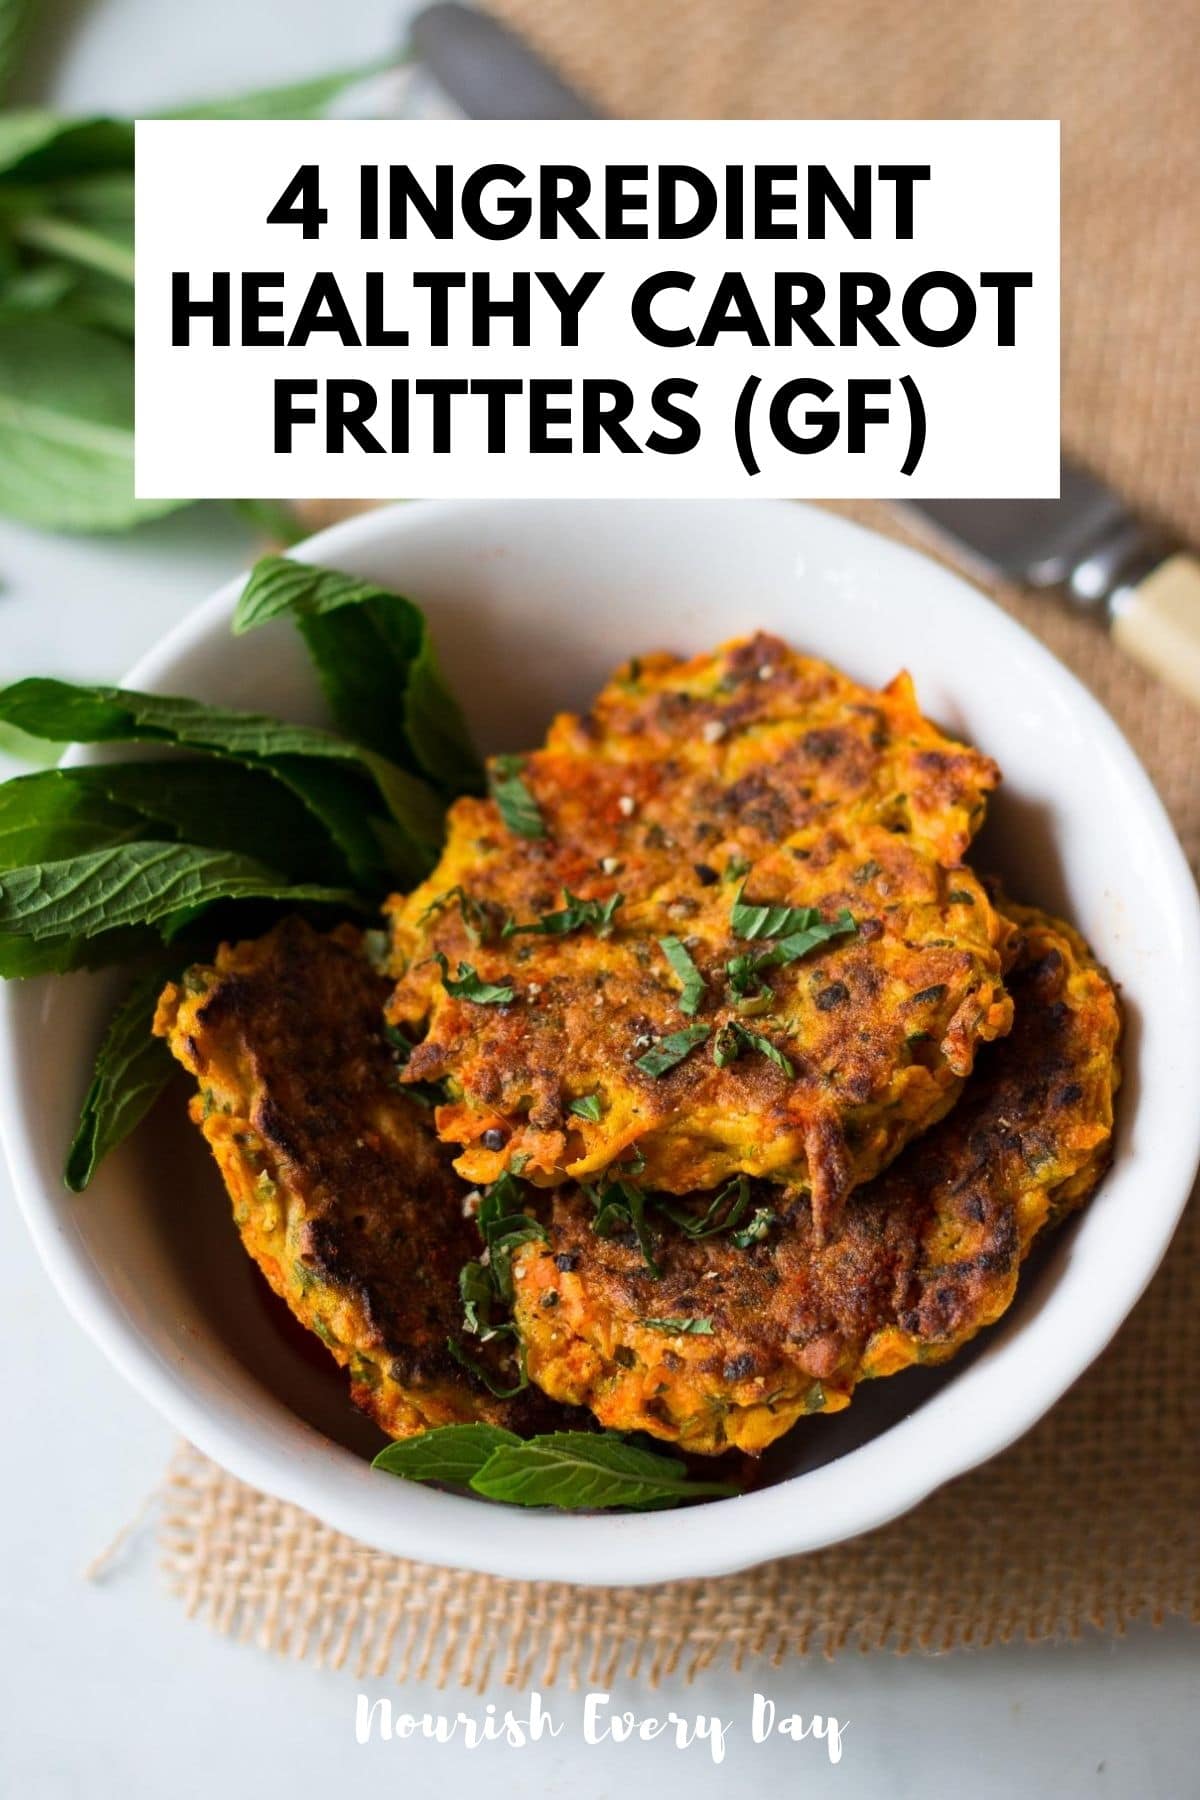 HEALTHY CARROT FRITTERS RECIPE PIN